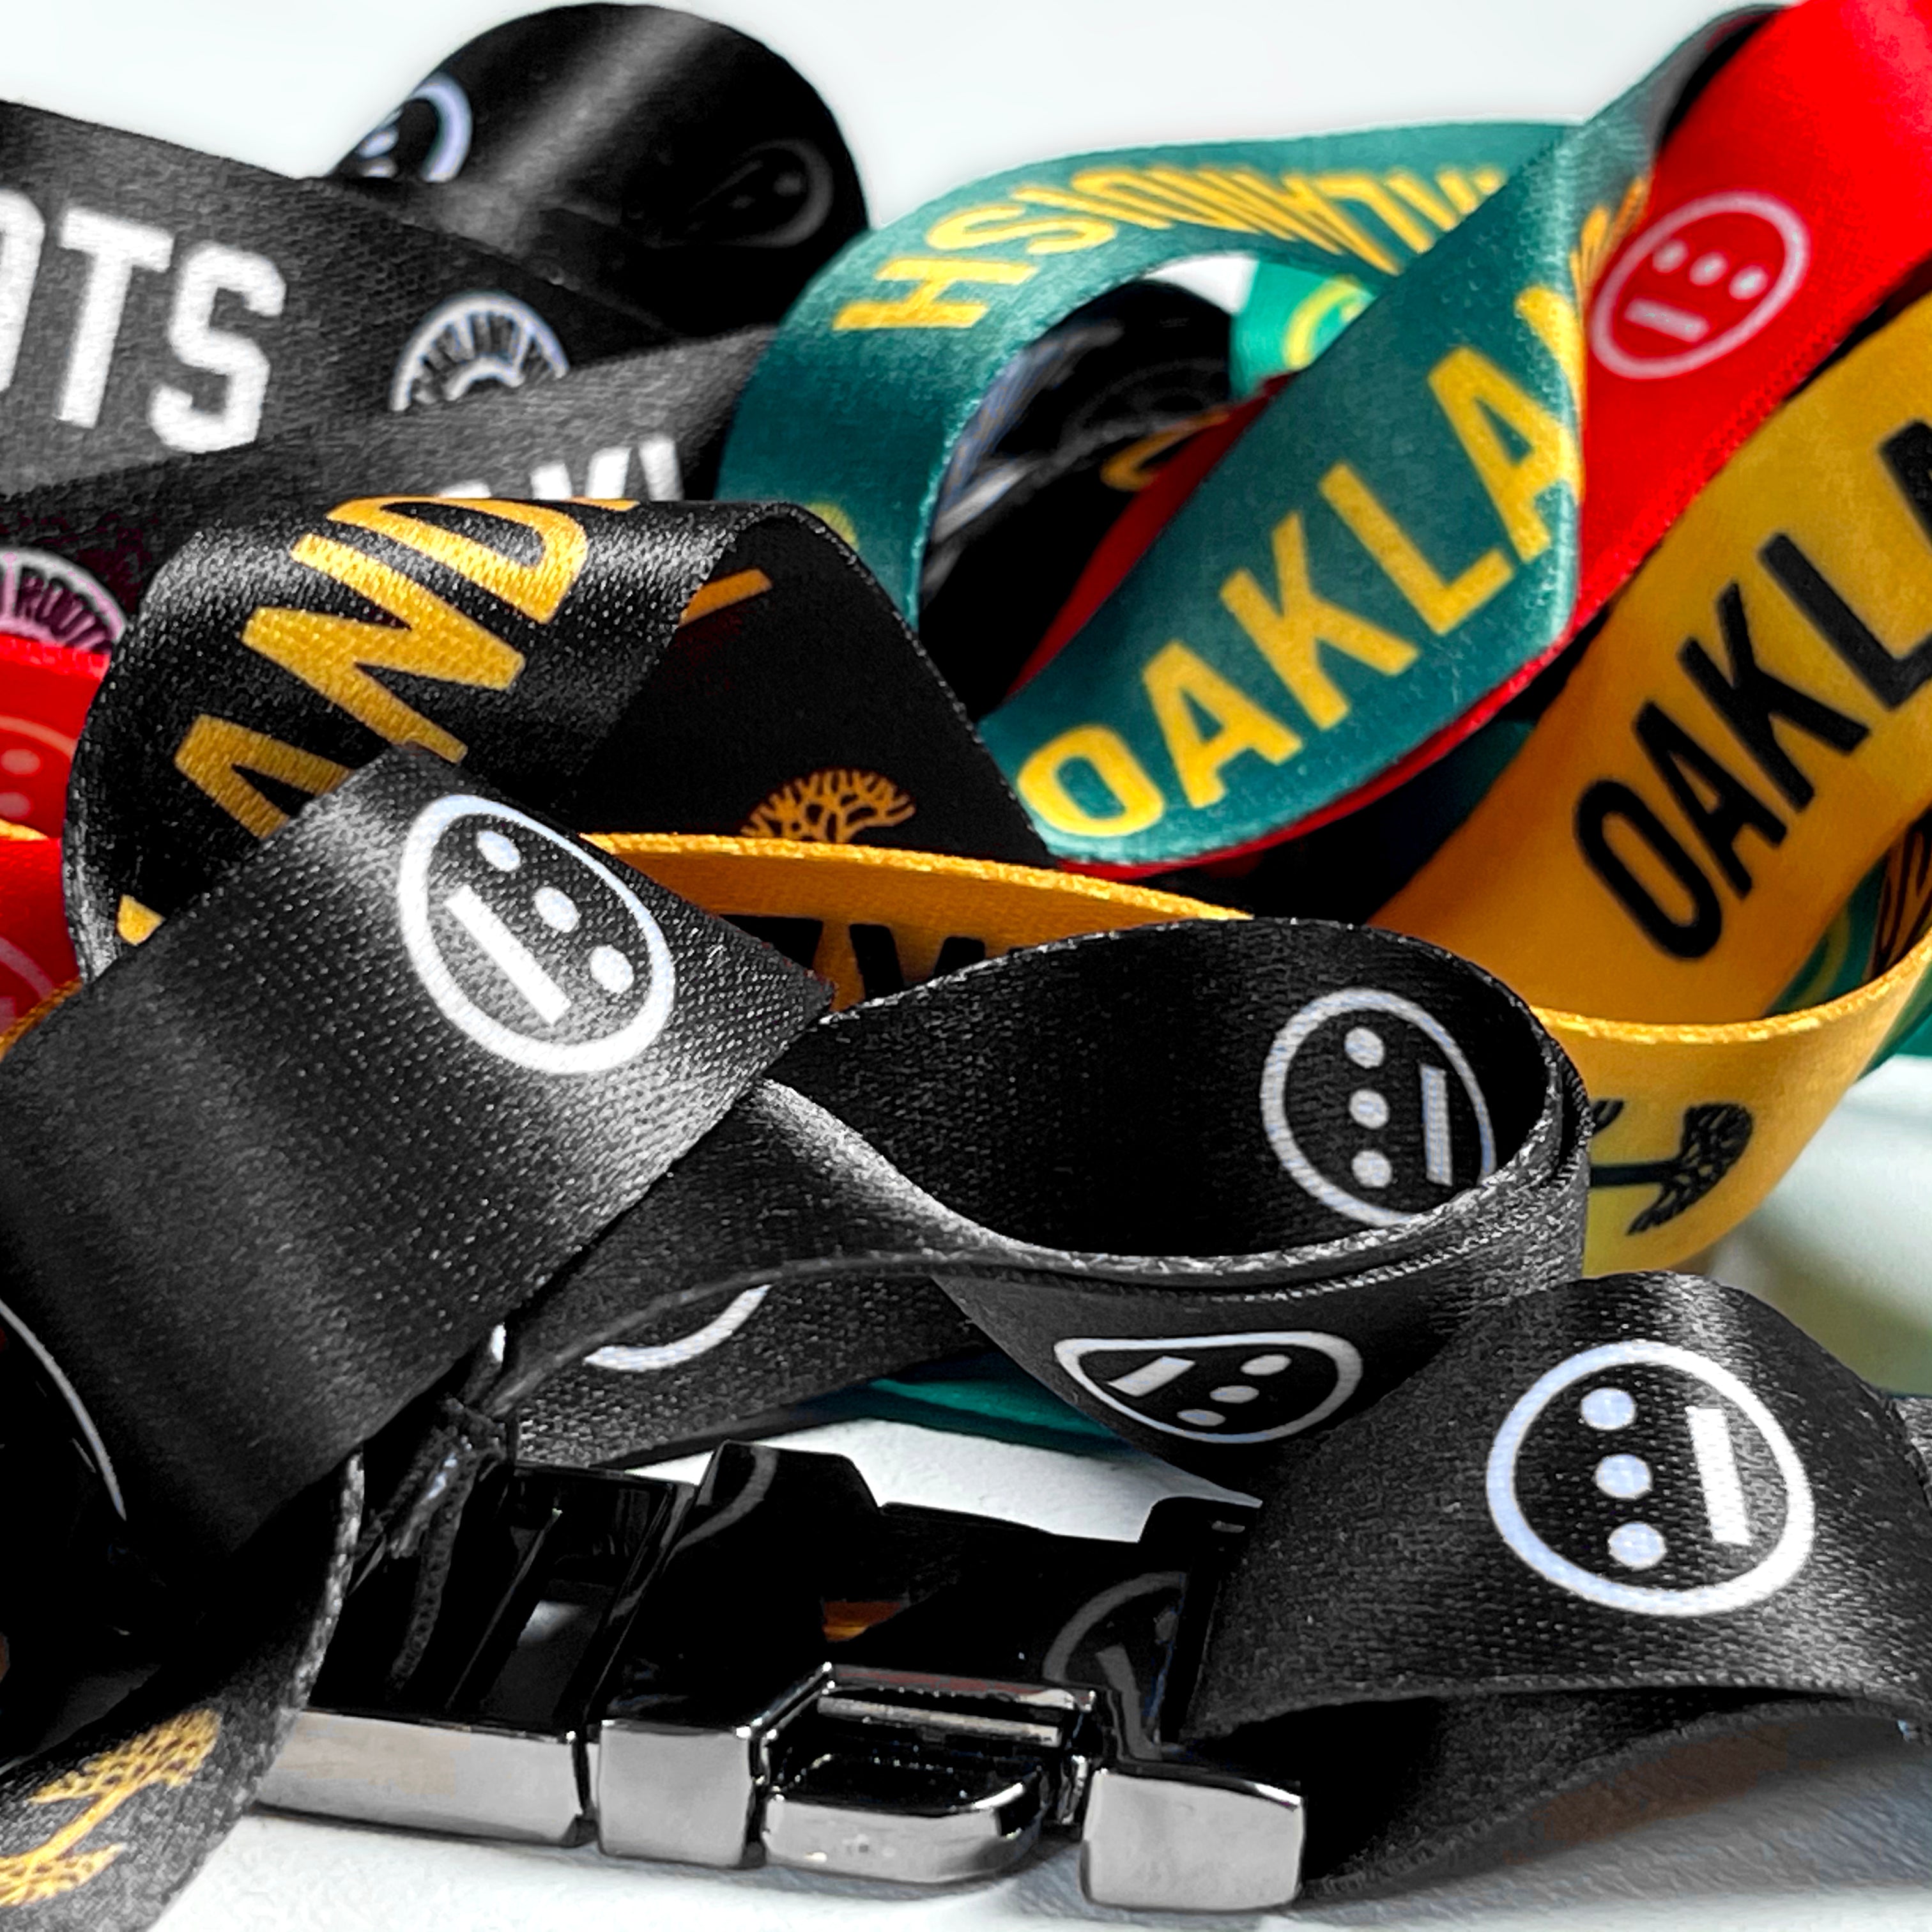 Detailed close-up of a jumble of red, yellow, black and green lanyards with Hiero hip-hop logos.